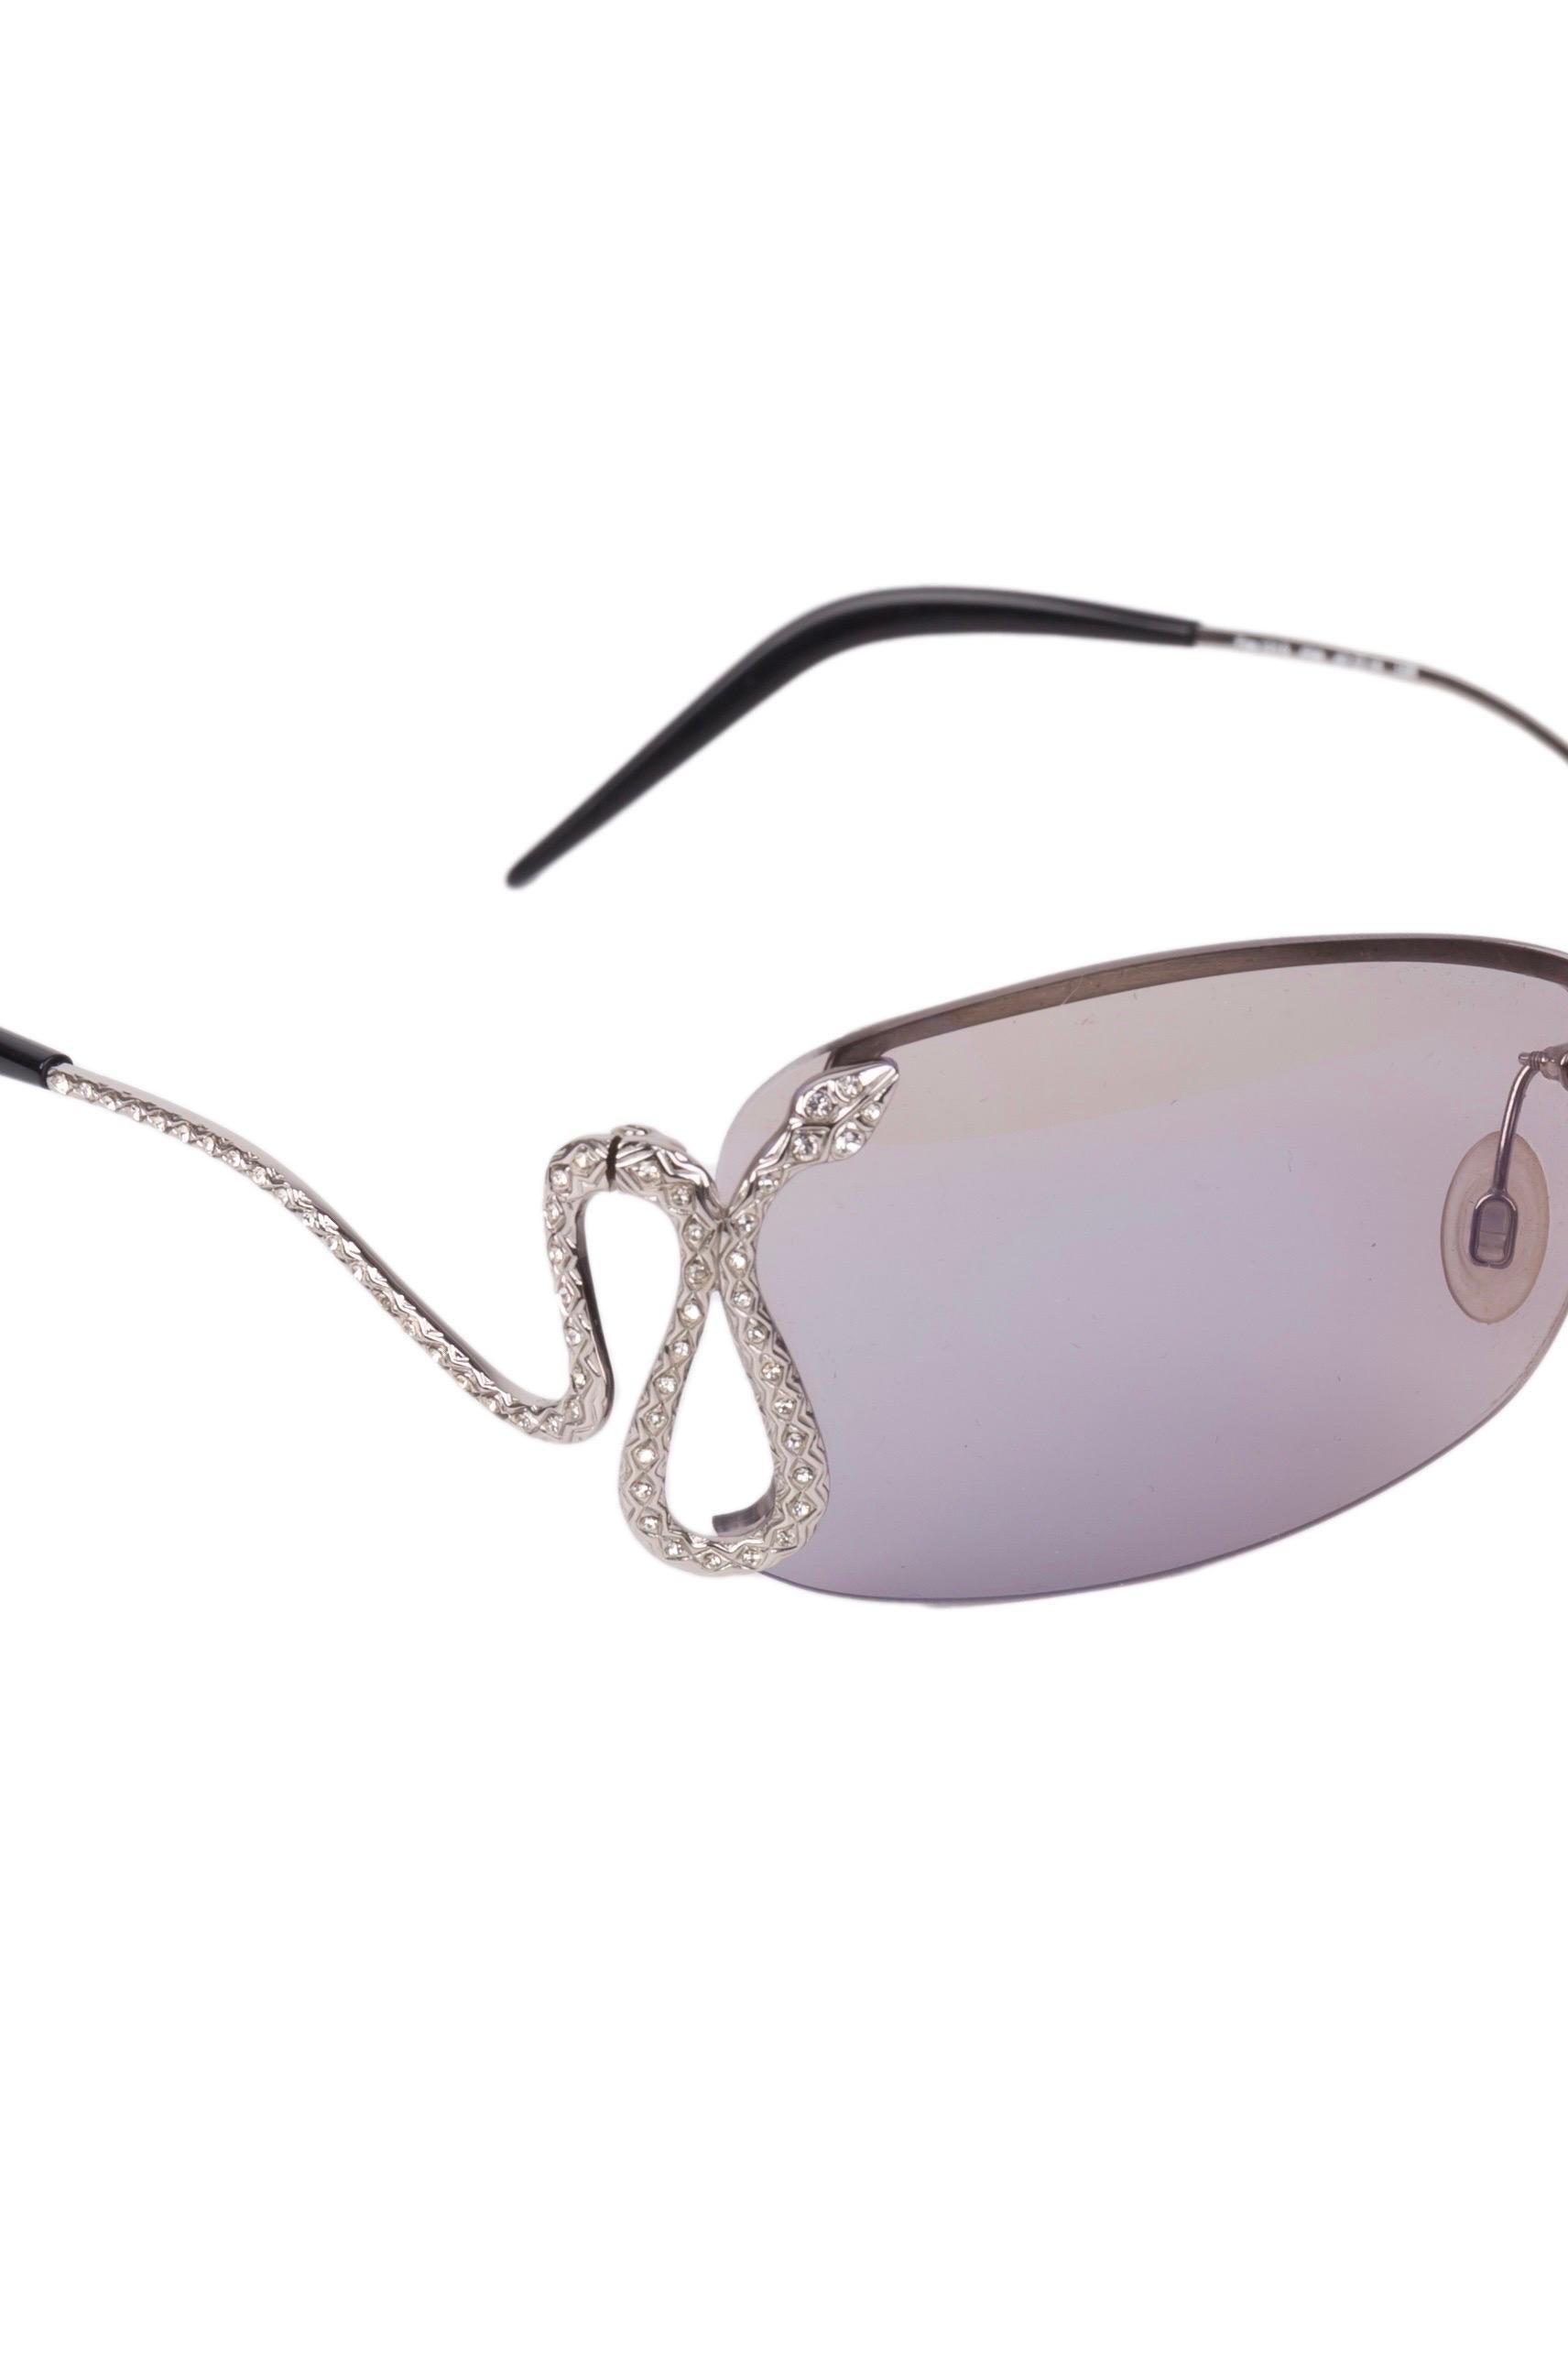  -Rimless mirror sunglasses
- Iridiscent grey/pink lenses
- Silver metal snake temples
- Comes with original case
